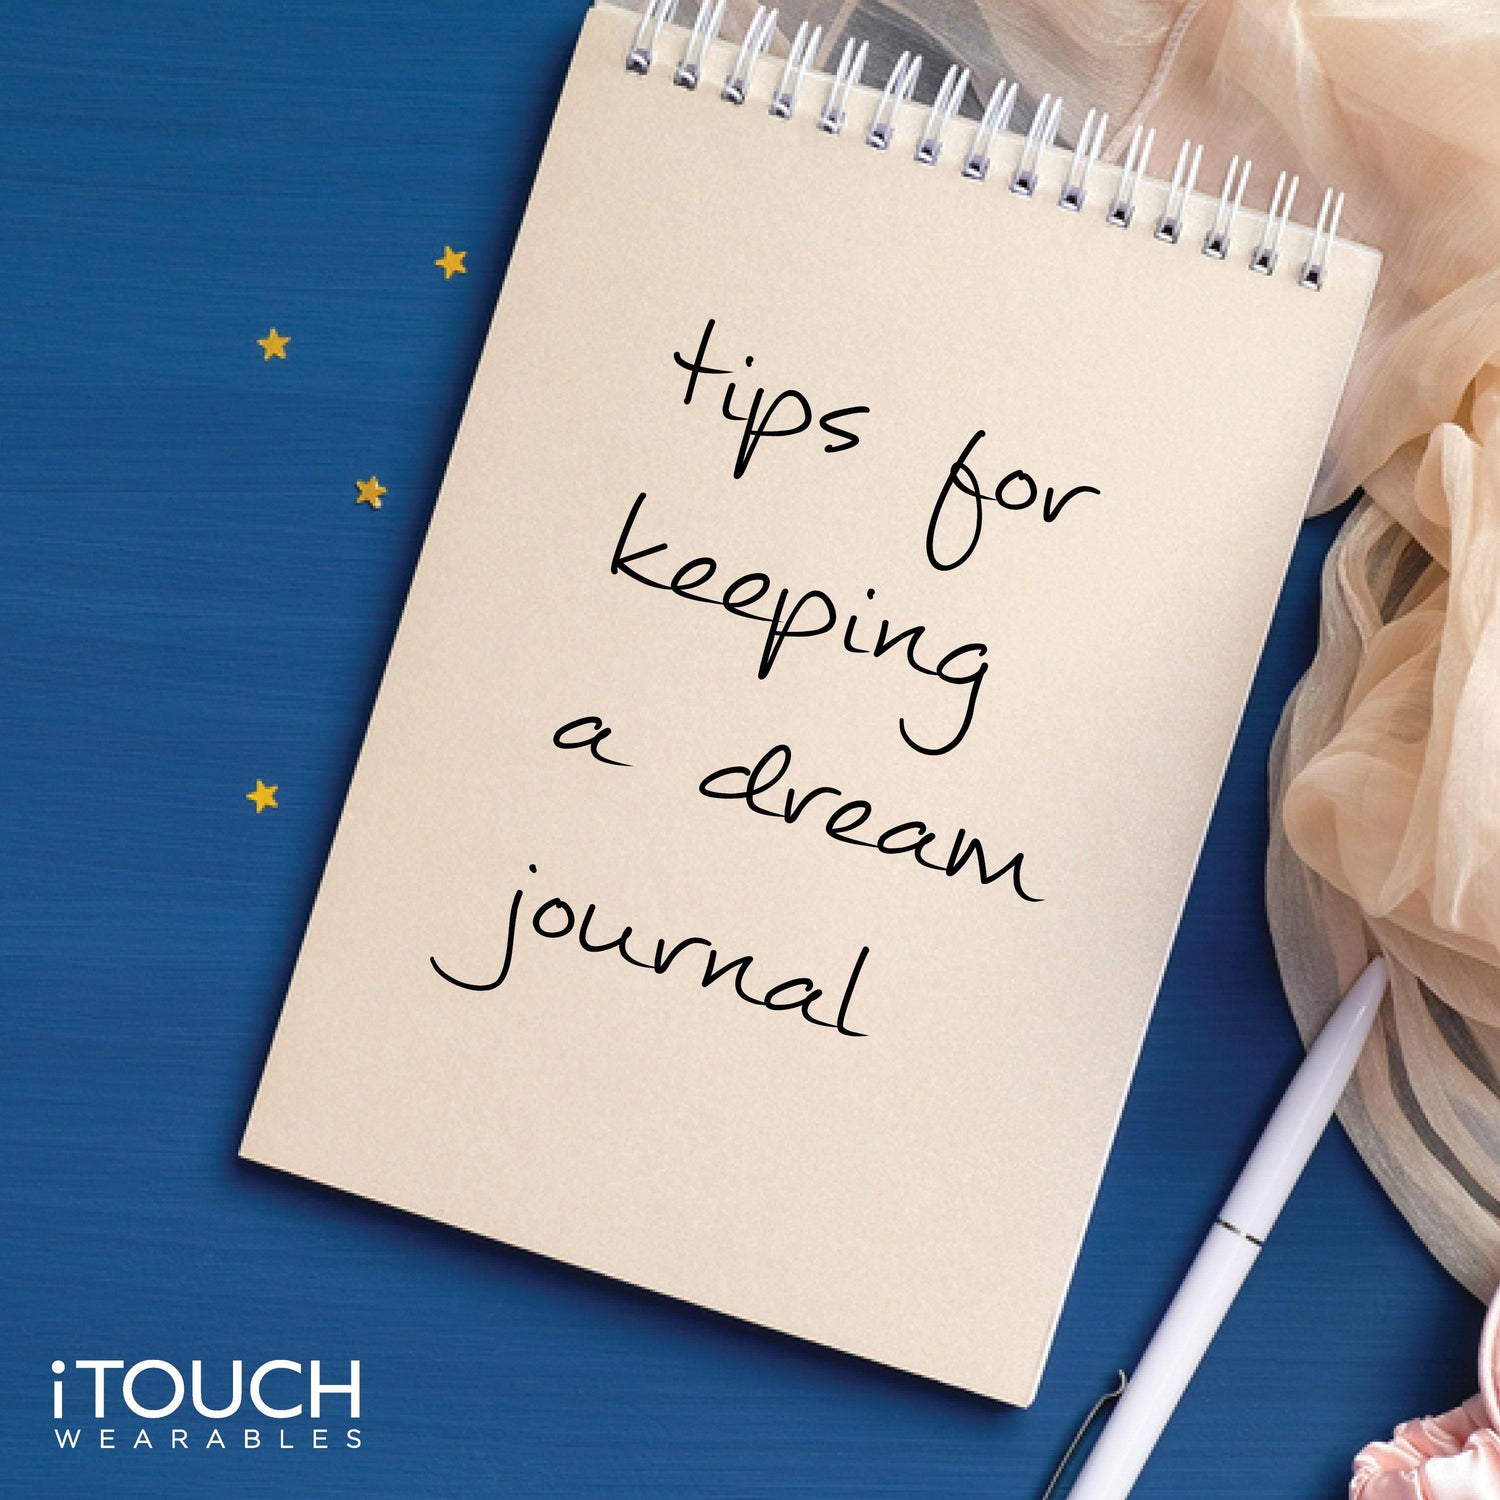 How To Keep A Dream Journal - iTOUCH Wearables